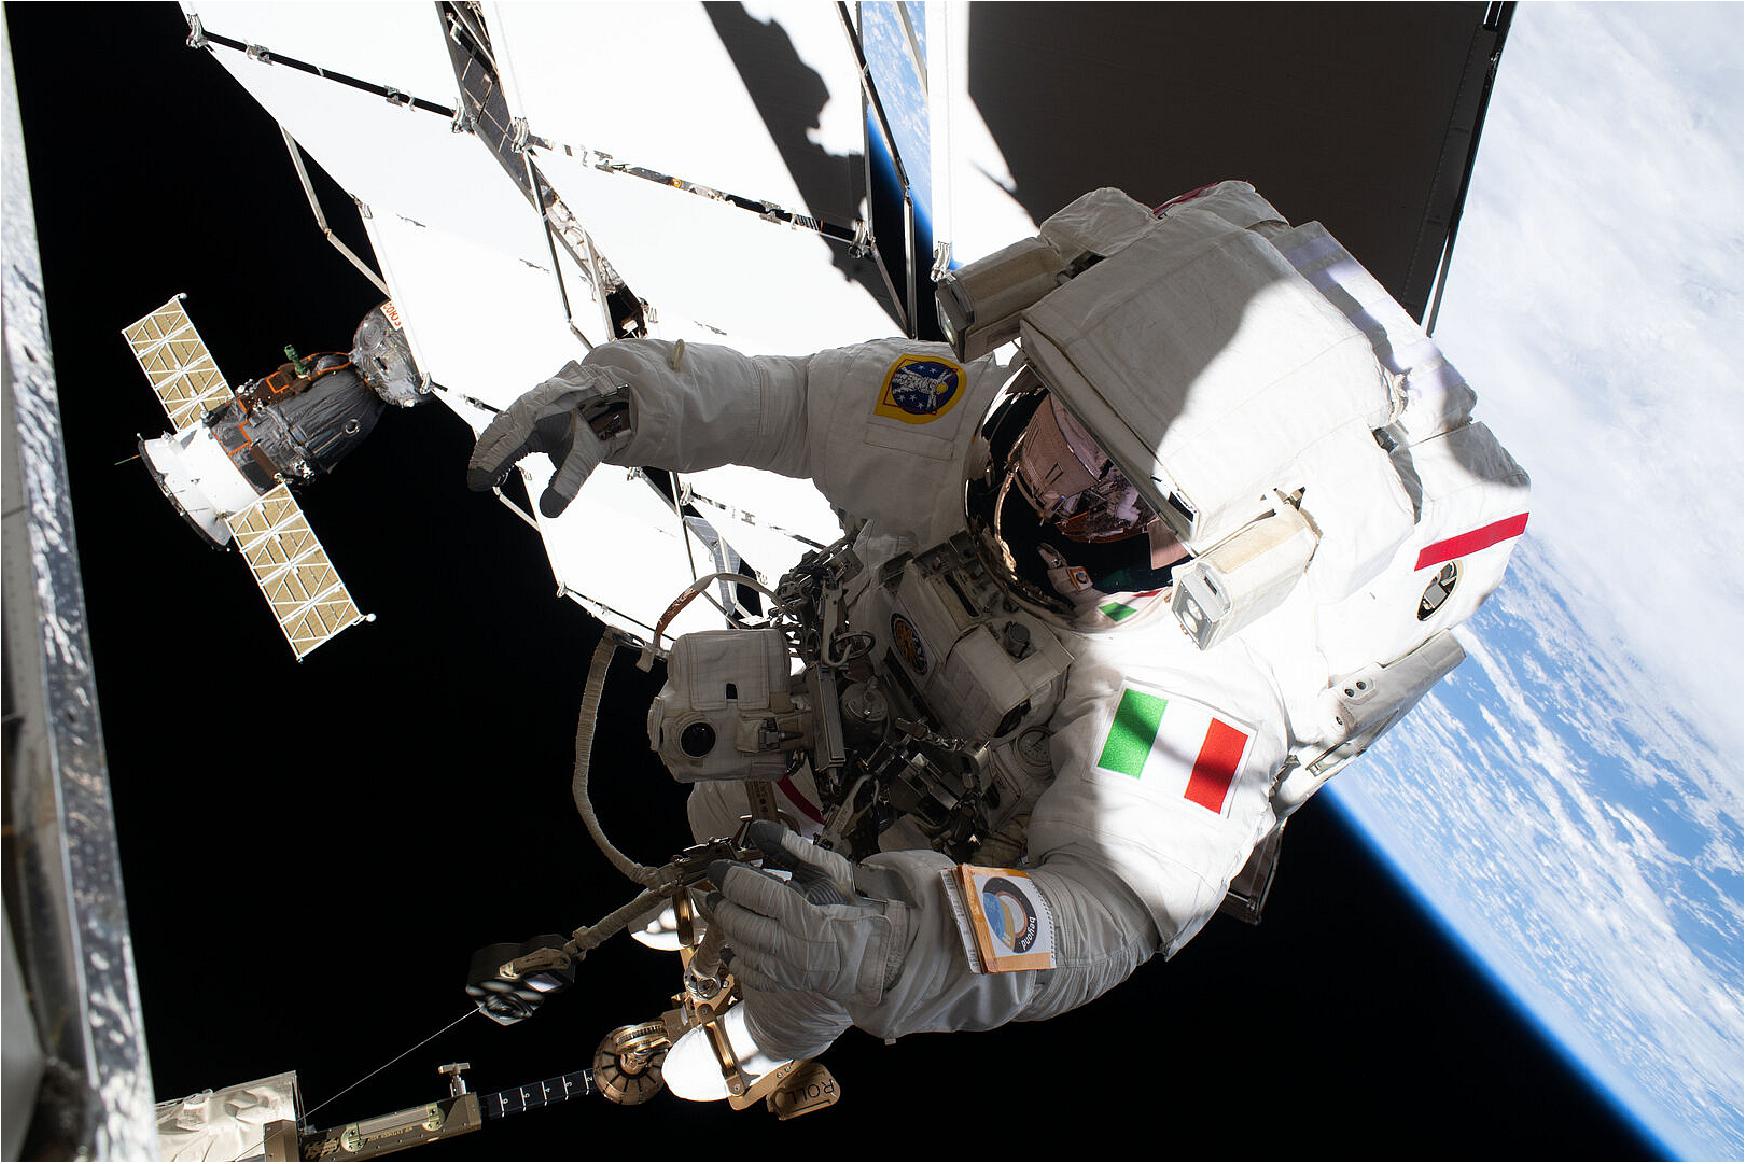 Figure 6: Riding on the International Space Station’s robotic arm, Luca soared to the cosmic ray detector’s worksite for nearly five hours of space plumbing (image credit: NASA)